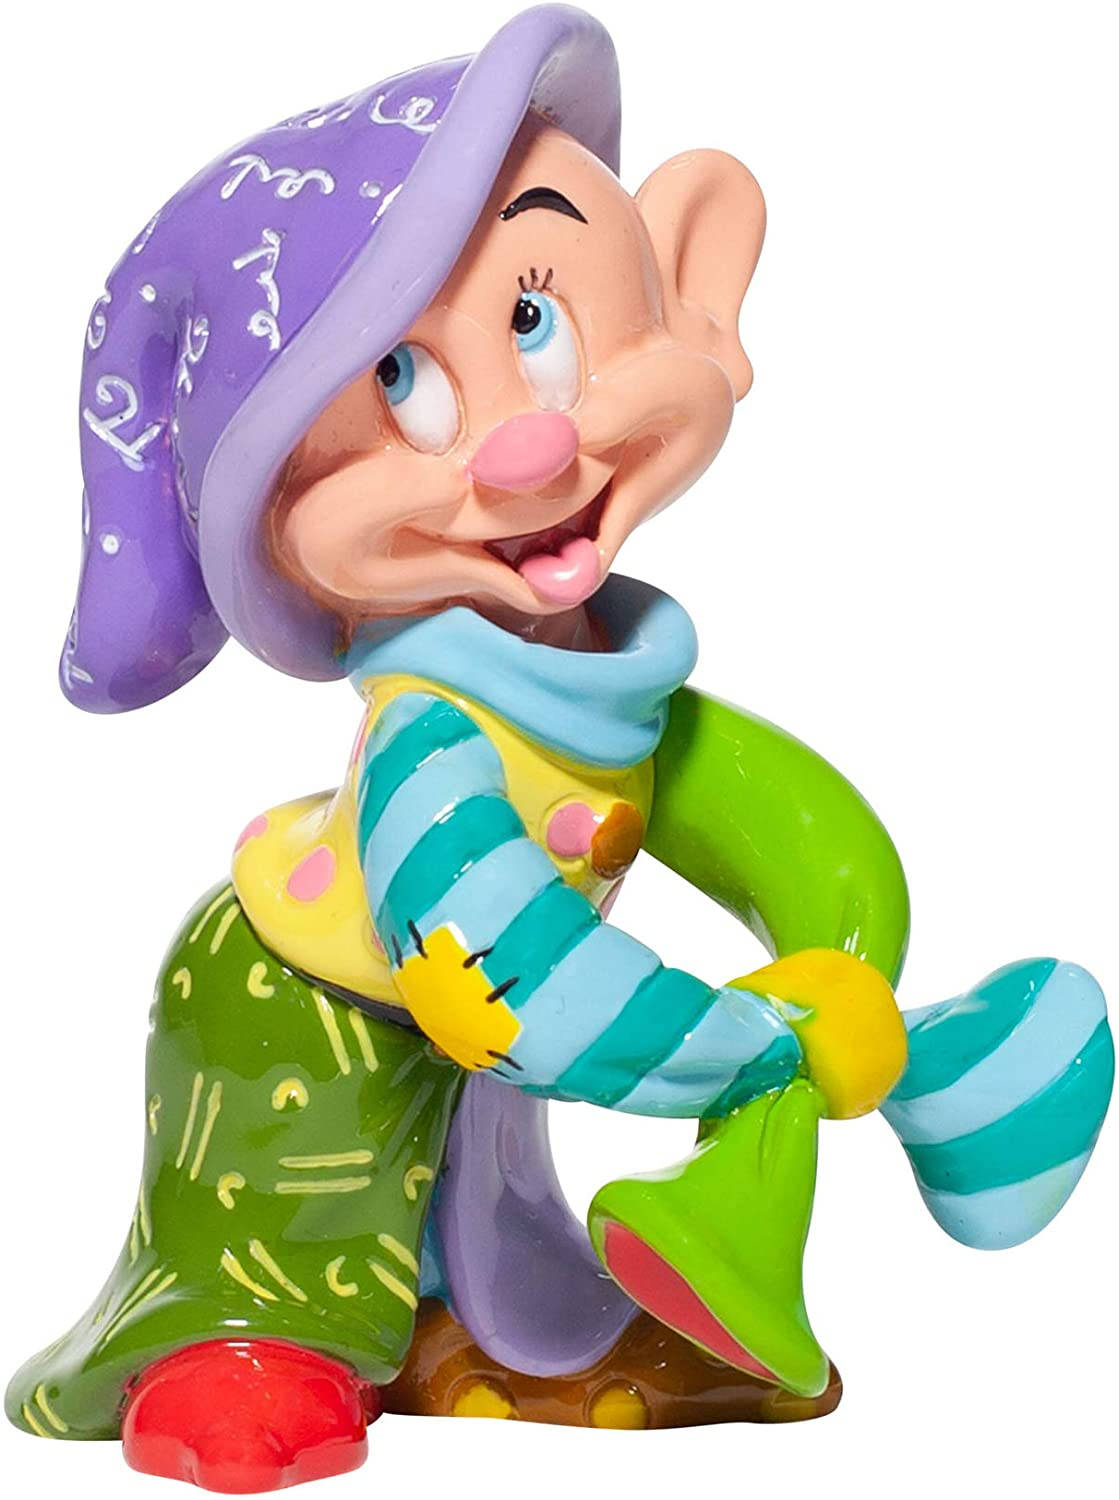 A playful statue of Dopey Dwarf from Disney's Snow White Wallpaper